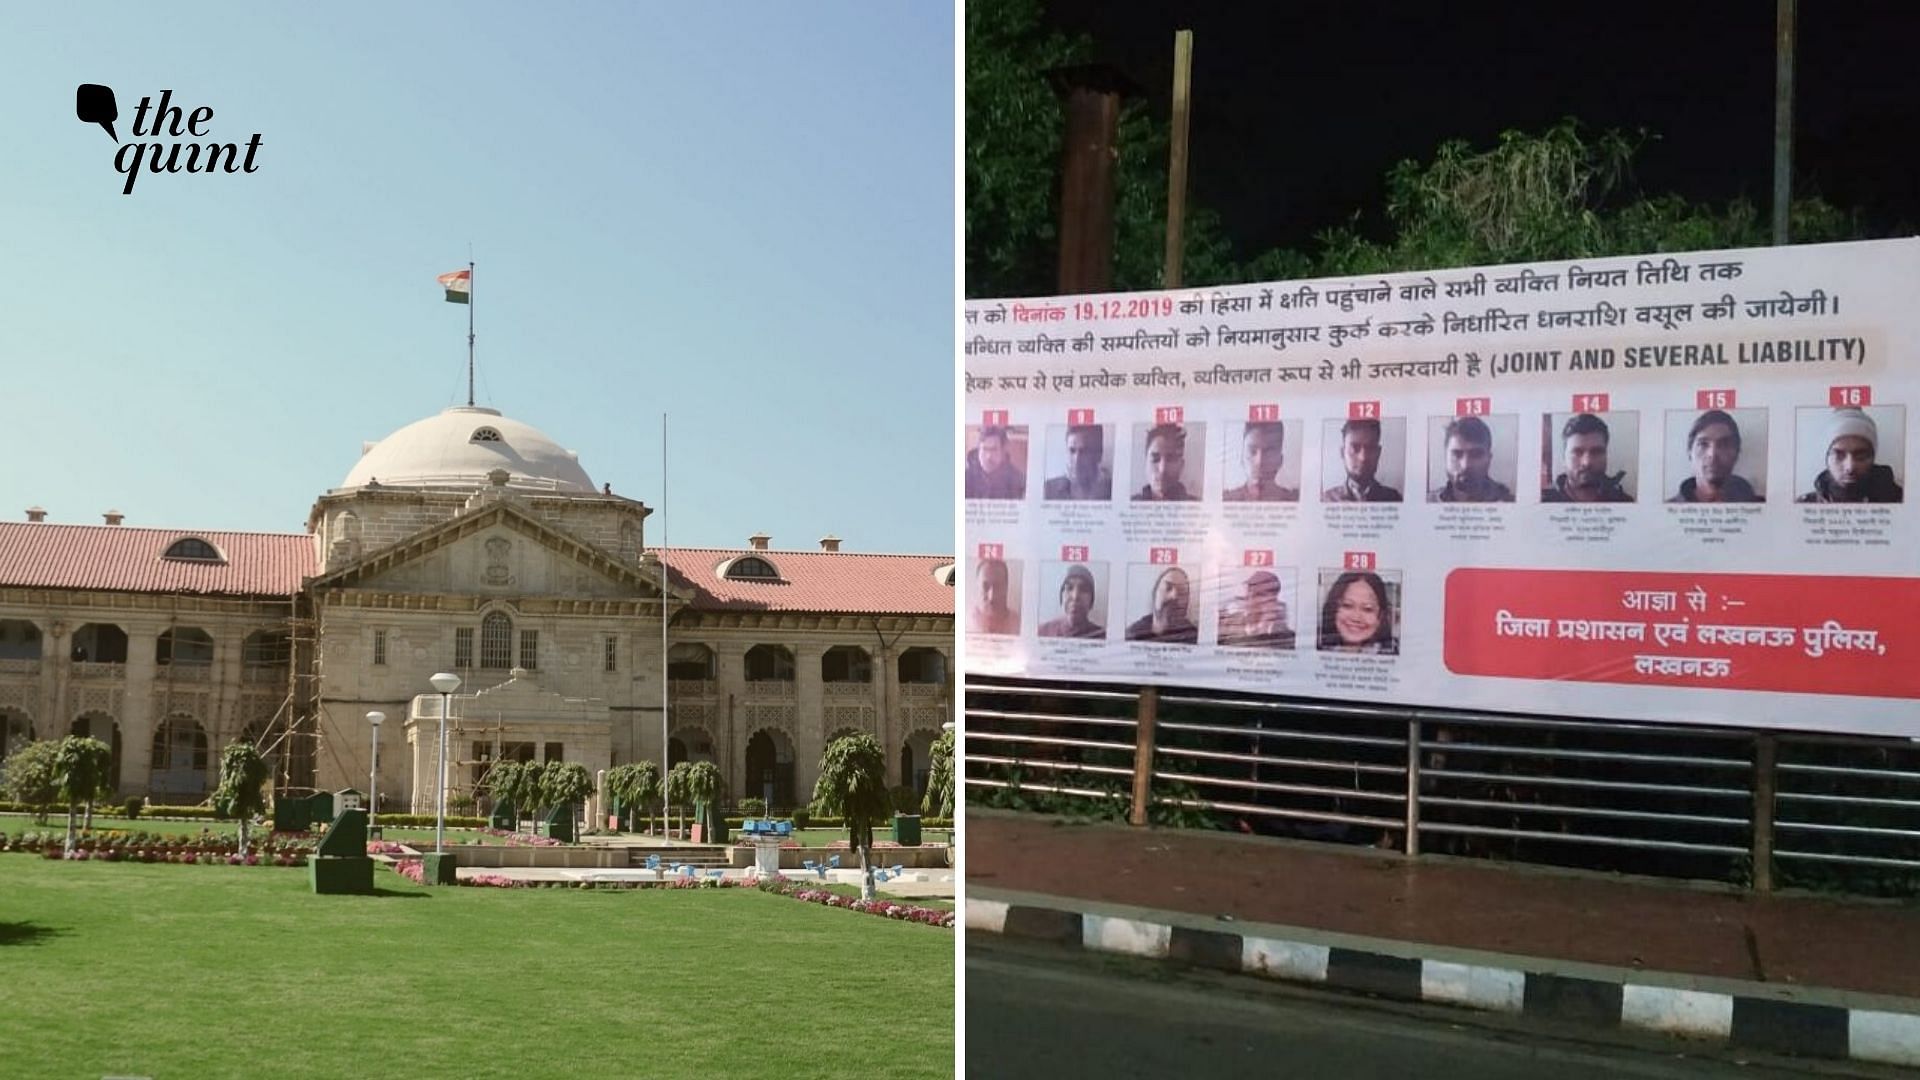 Allahabad High Court ordered the removal of the hoardings put up by Uttar Pradesh government that named, with